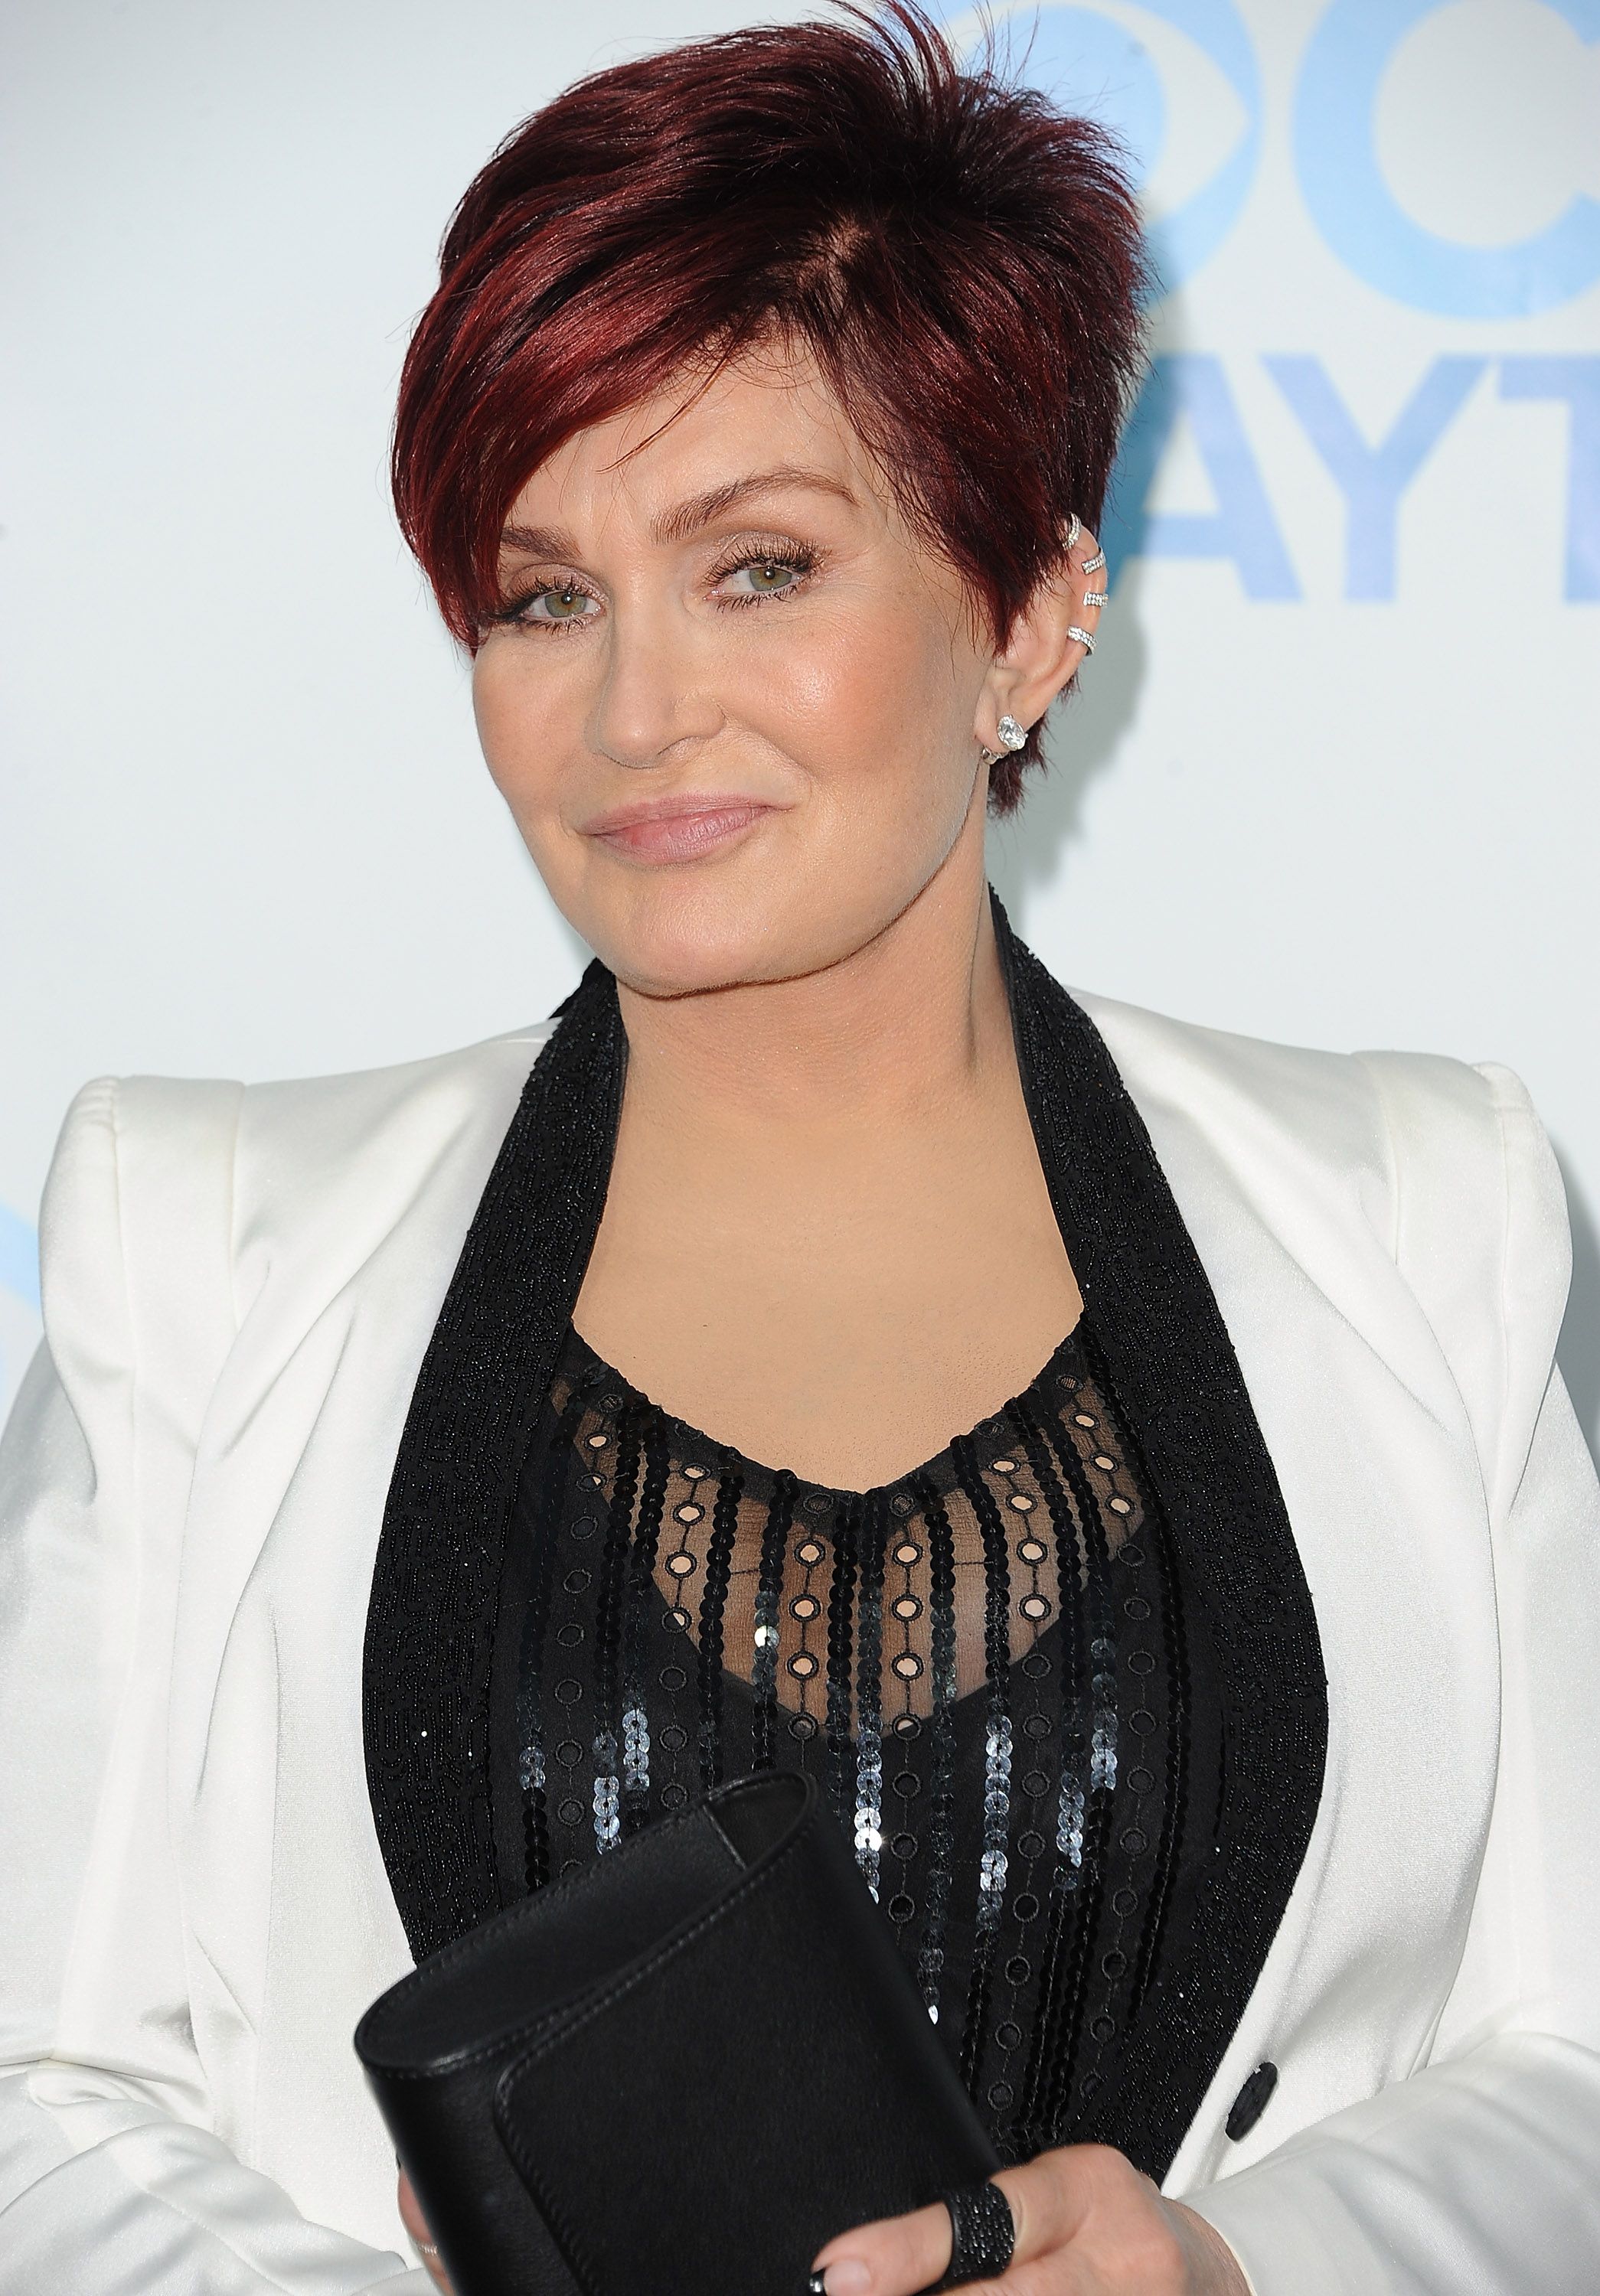 Sharon Osbourne at the 41st Annual Daytime Emmy Awards CBS after-party on June 22, 2014, in Beverly Hills, California | Photo: Angela Weiss/Getty Images